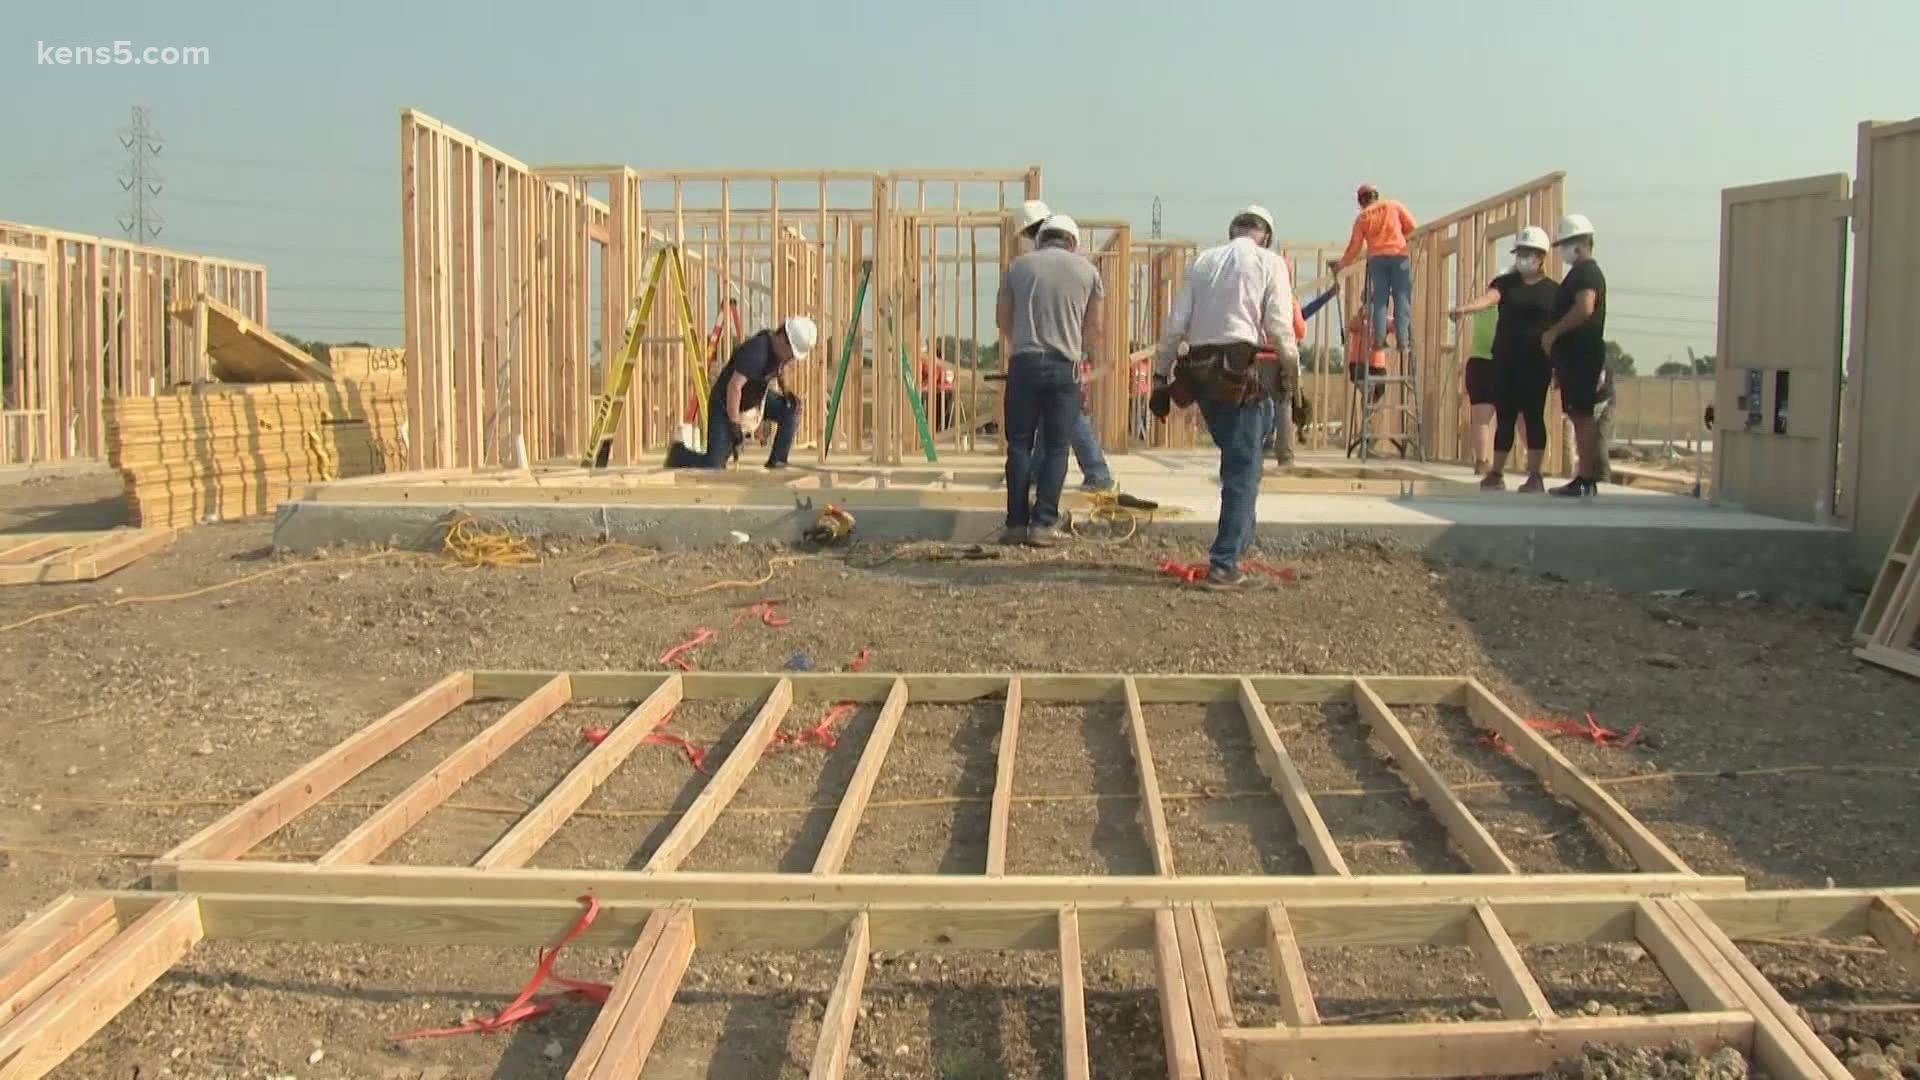 Over the course of nearly half a century, the organization has helped build more than 1,200 homes in San Antonio and the surrounding region.